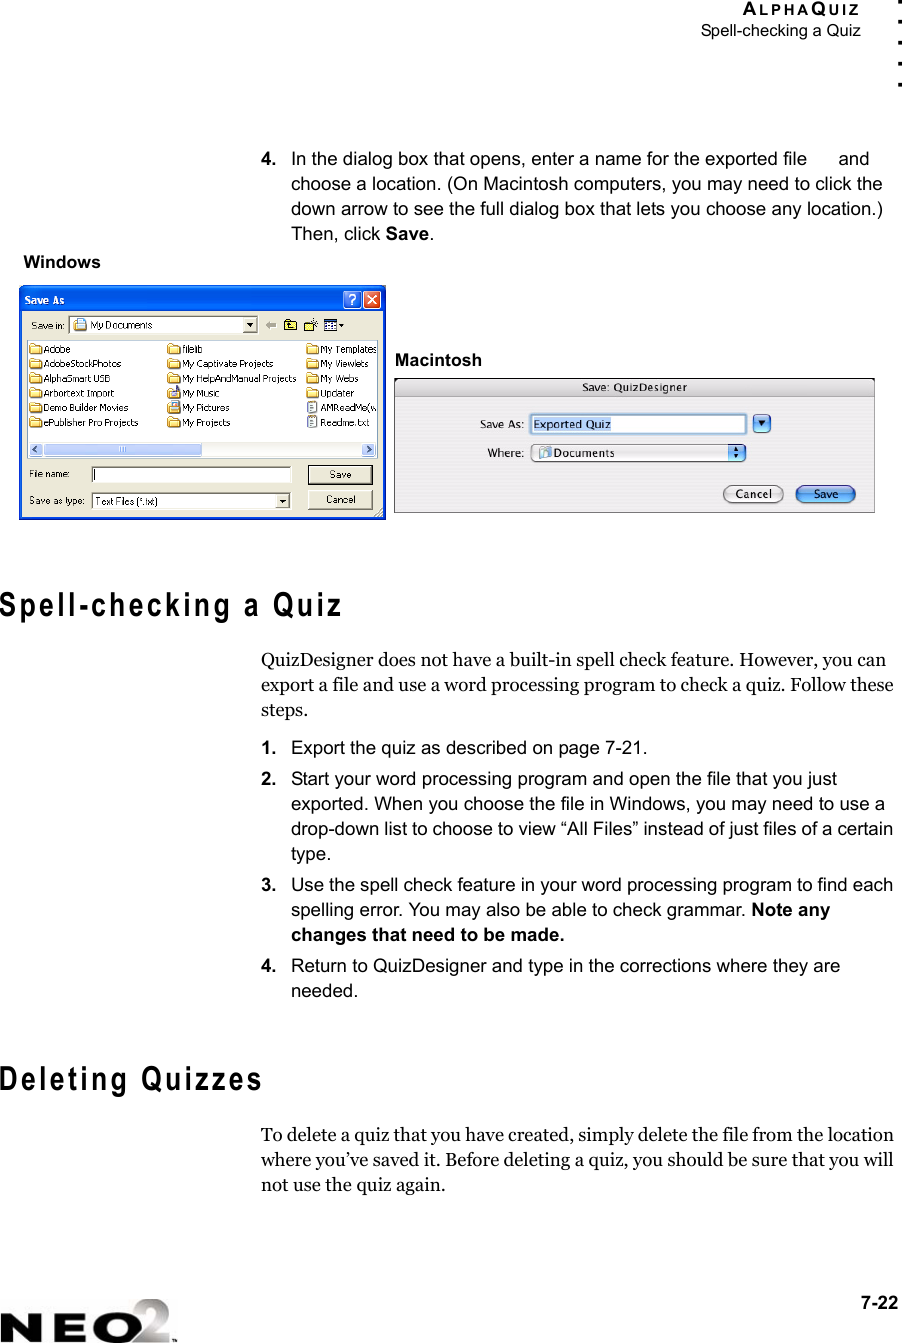 ALPHAQUIZSpell-checking a Quiz7-22. . . . .4. In the dialog box that opens, enter a name for the exported file   and choose a location. (On Macintosh computers, you may need to click the down arrow to see the full dialog box that lets you choose any location.) Then, click Save.Spell-checking a QuizQuizDesigner does not have a built-in spell check feature. However, you can export a file and use a word processing program to check a quiz. Follow these steps.1. Export the quiz as described on page 7-21.2. Start your word processing program and open the file that you just exported. When you choose the file in Windows, you may need to use a drop-down list to choose to view “All Files” instead of just files of a certain type.3. Use the spell check feature in your word processing program to find each spelling error. You may also be able to check grammar. Note any changes that need to be made.4. Return to QuizDesigner and type in the corrections where they are needed.Deleting QuizzesTo delete a quiz that you have created, simply delete the file from the location where you’ve saved it. Before deleting a quiz, you should be sure that you will not use the quiz again.WindowsMacintosh